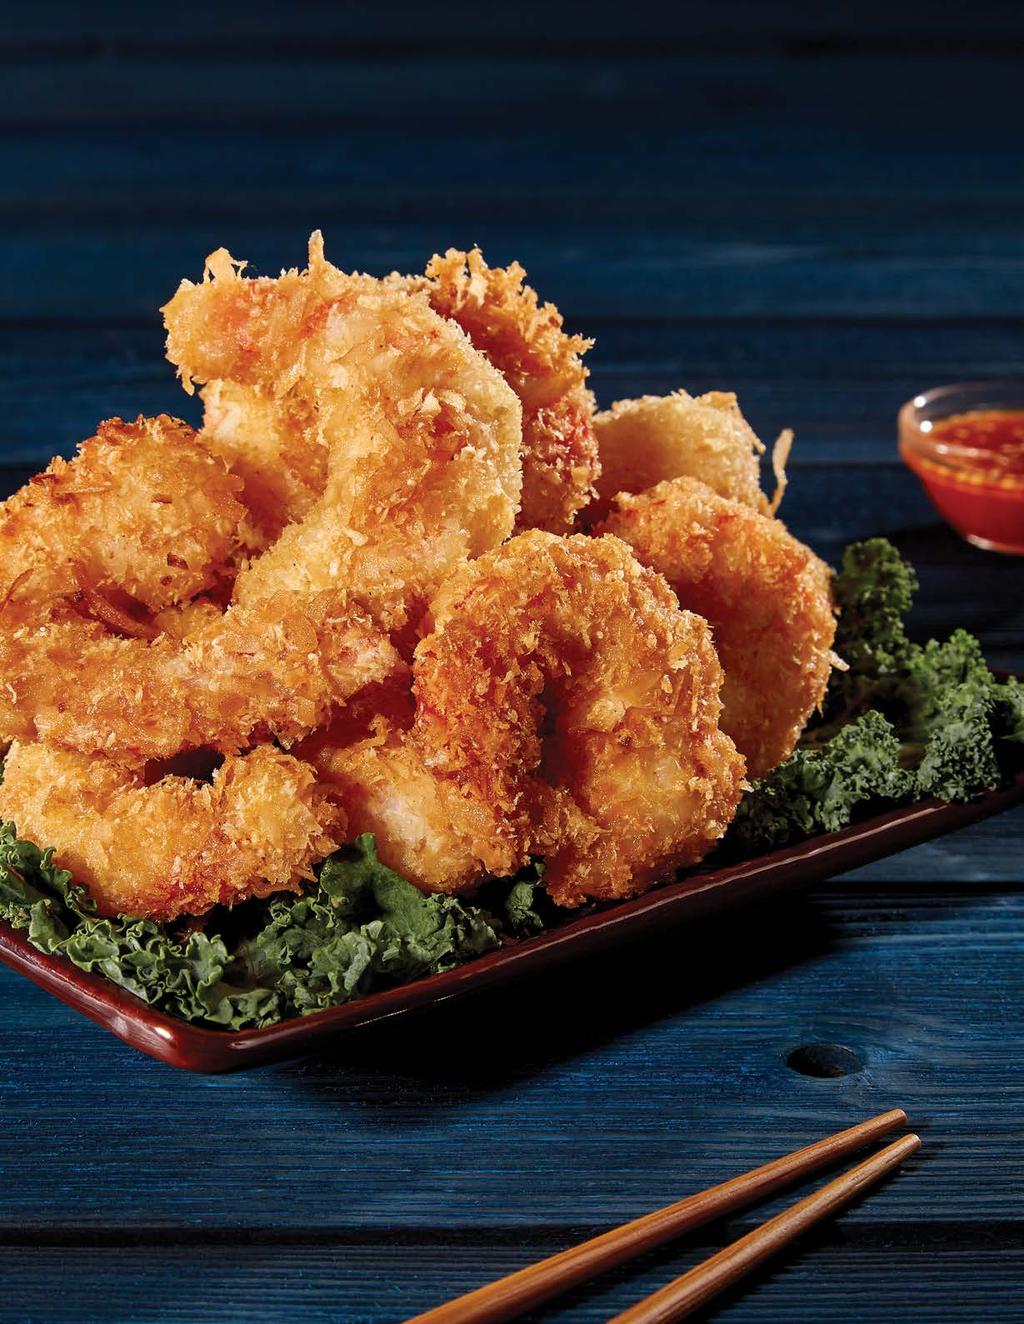 SERVES 8 Coconut Shrimp 2 lb. large shrimp, peeled & deveined 2 cups egg whites, beaten ½ cup water 1 cup cornstarch 3 cups shredded coconut 1 cup panko breadcrumbs 2 qt.